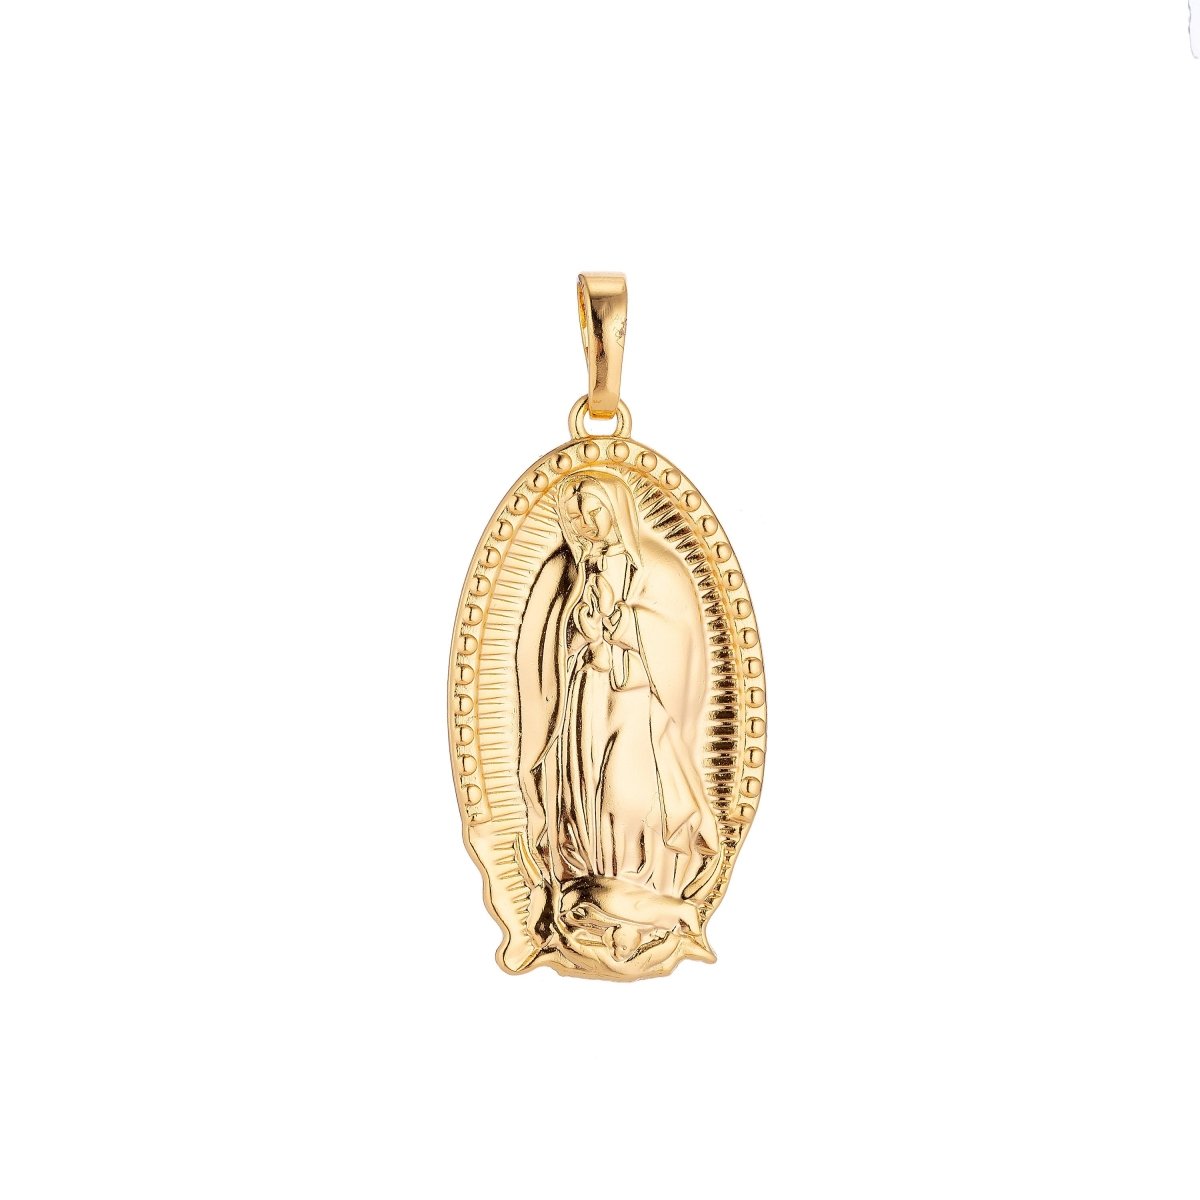 40x18mm Gold filled Virgin Mother Mary Oval Pendant Gold Religious Charm Catholic Rosary Pendants H-705 - DLUXCA